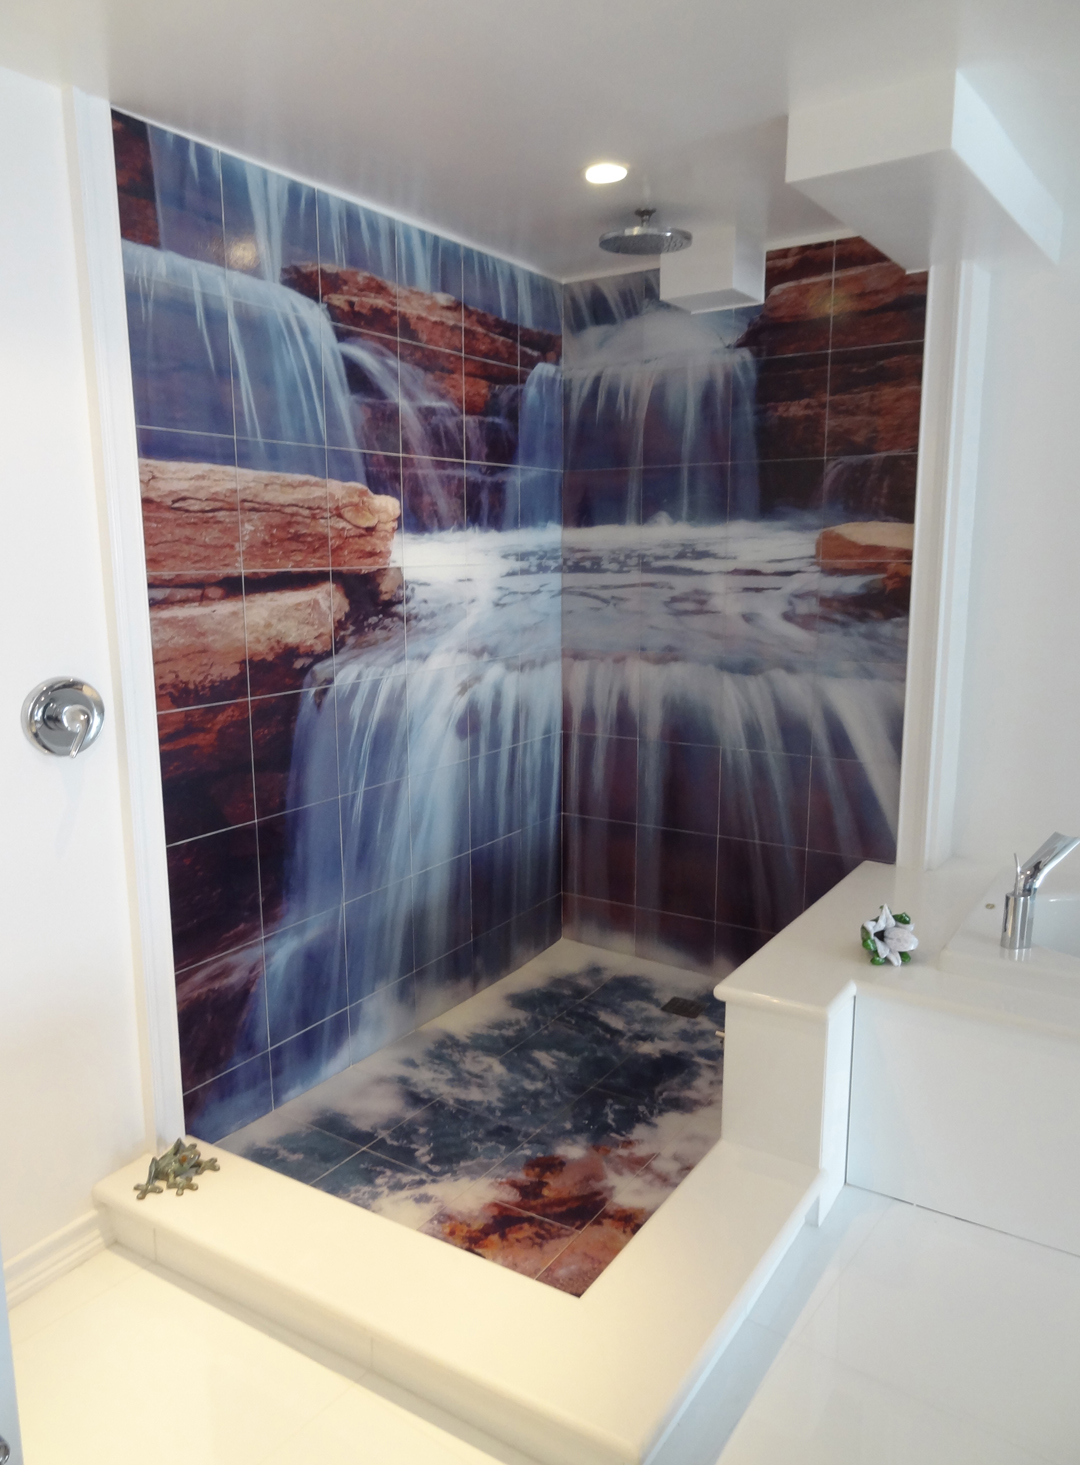 What are Custom Tile Murals? How to make them?